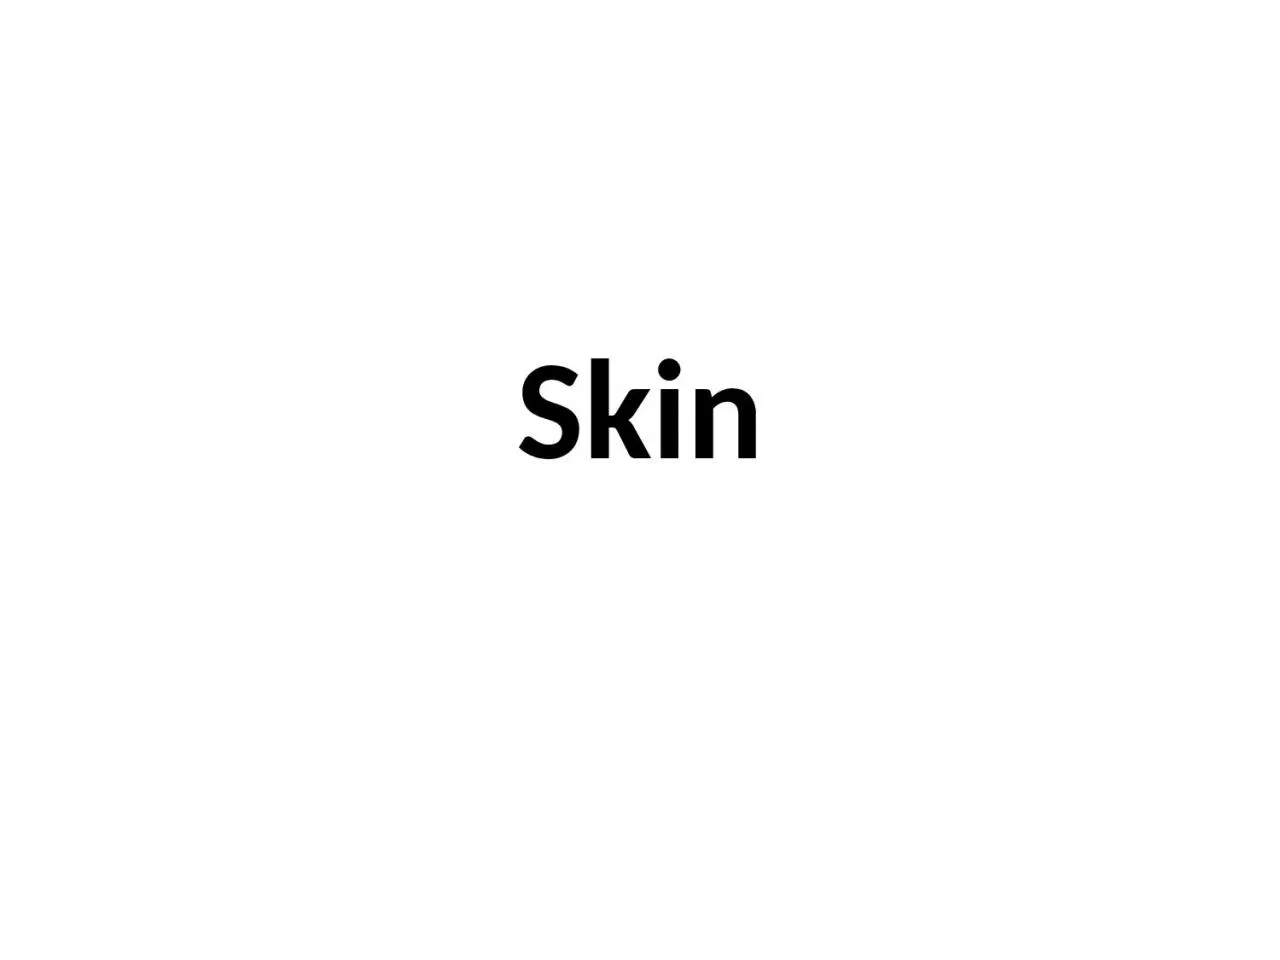 Skin The skin is the first heaviest organ in the